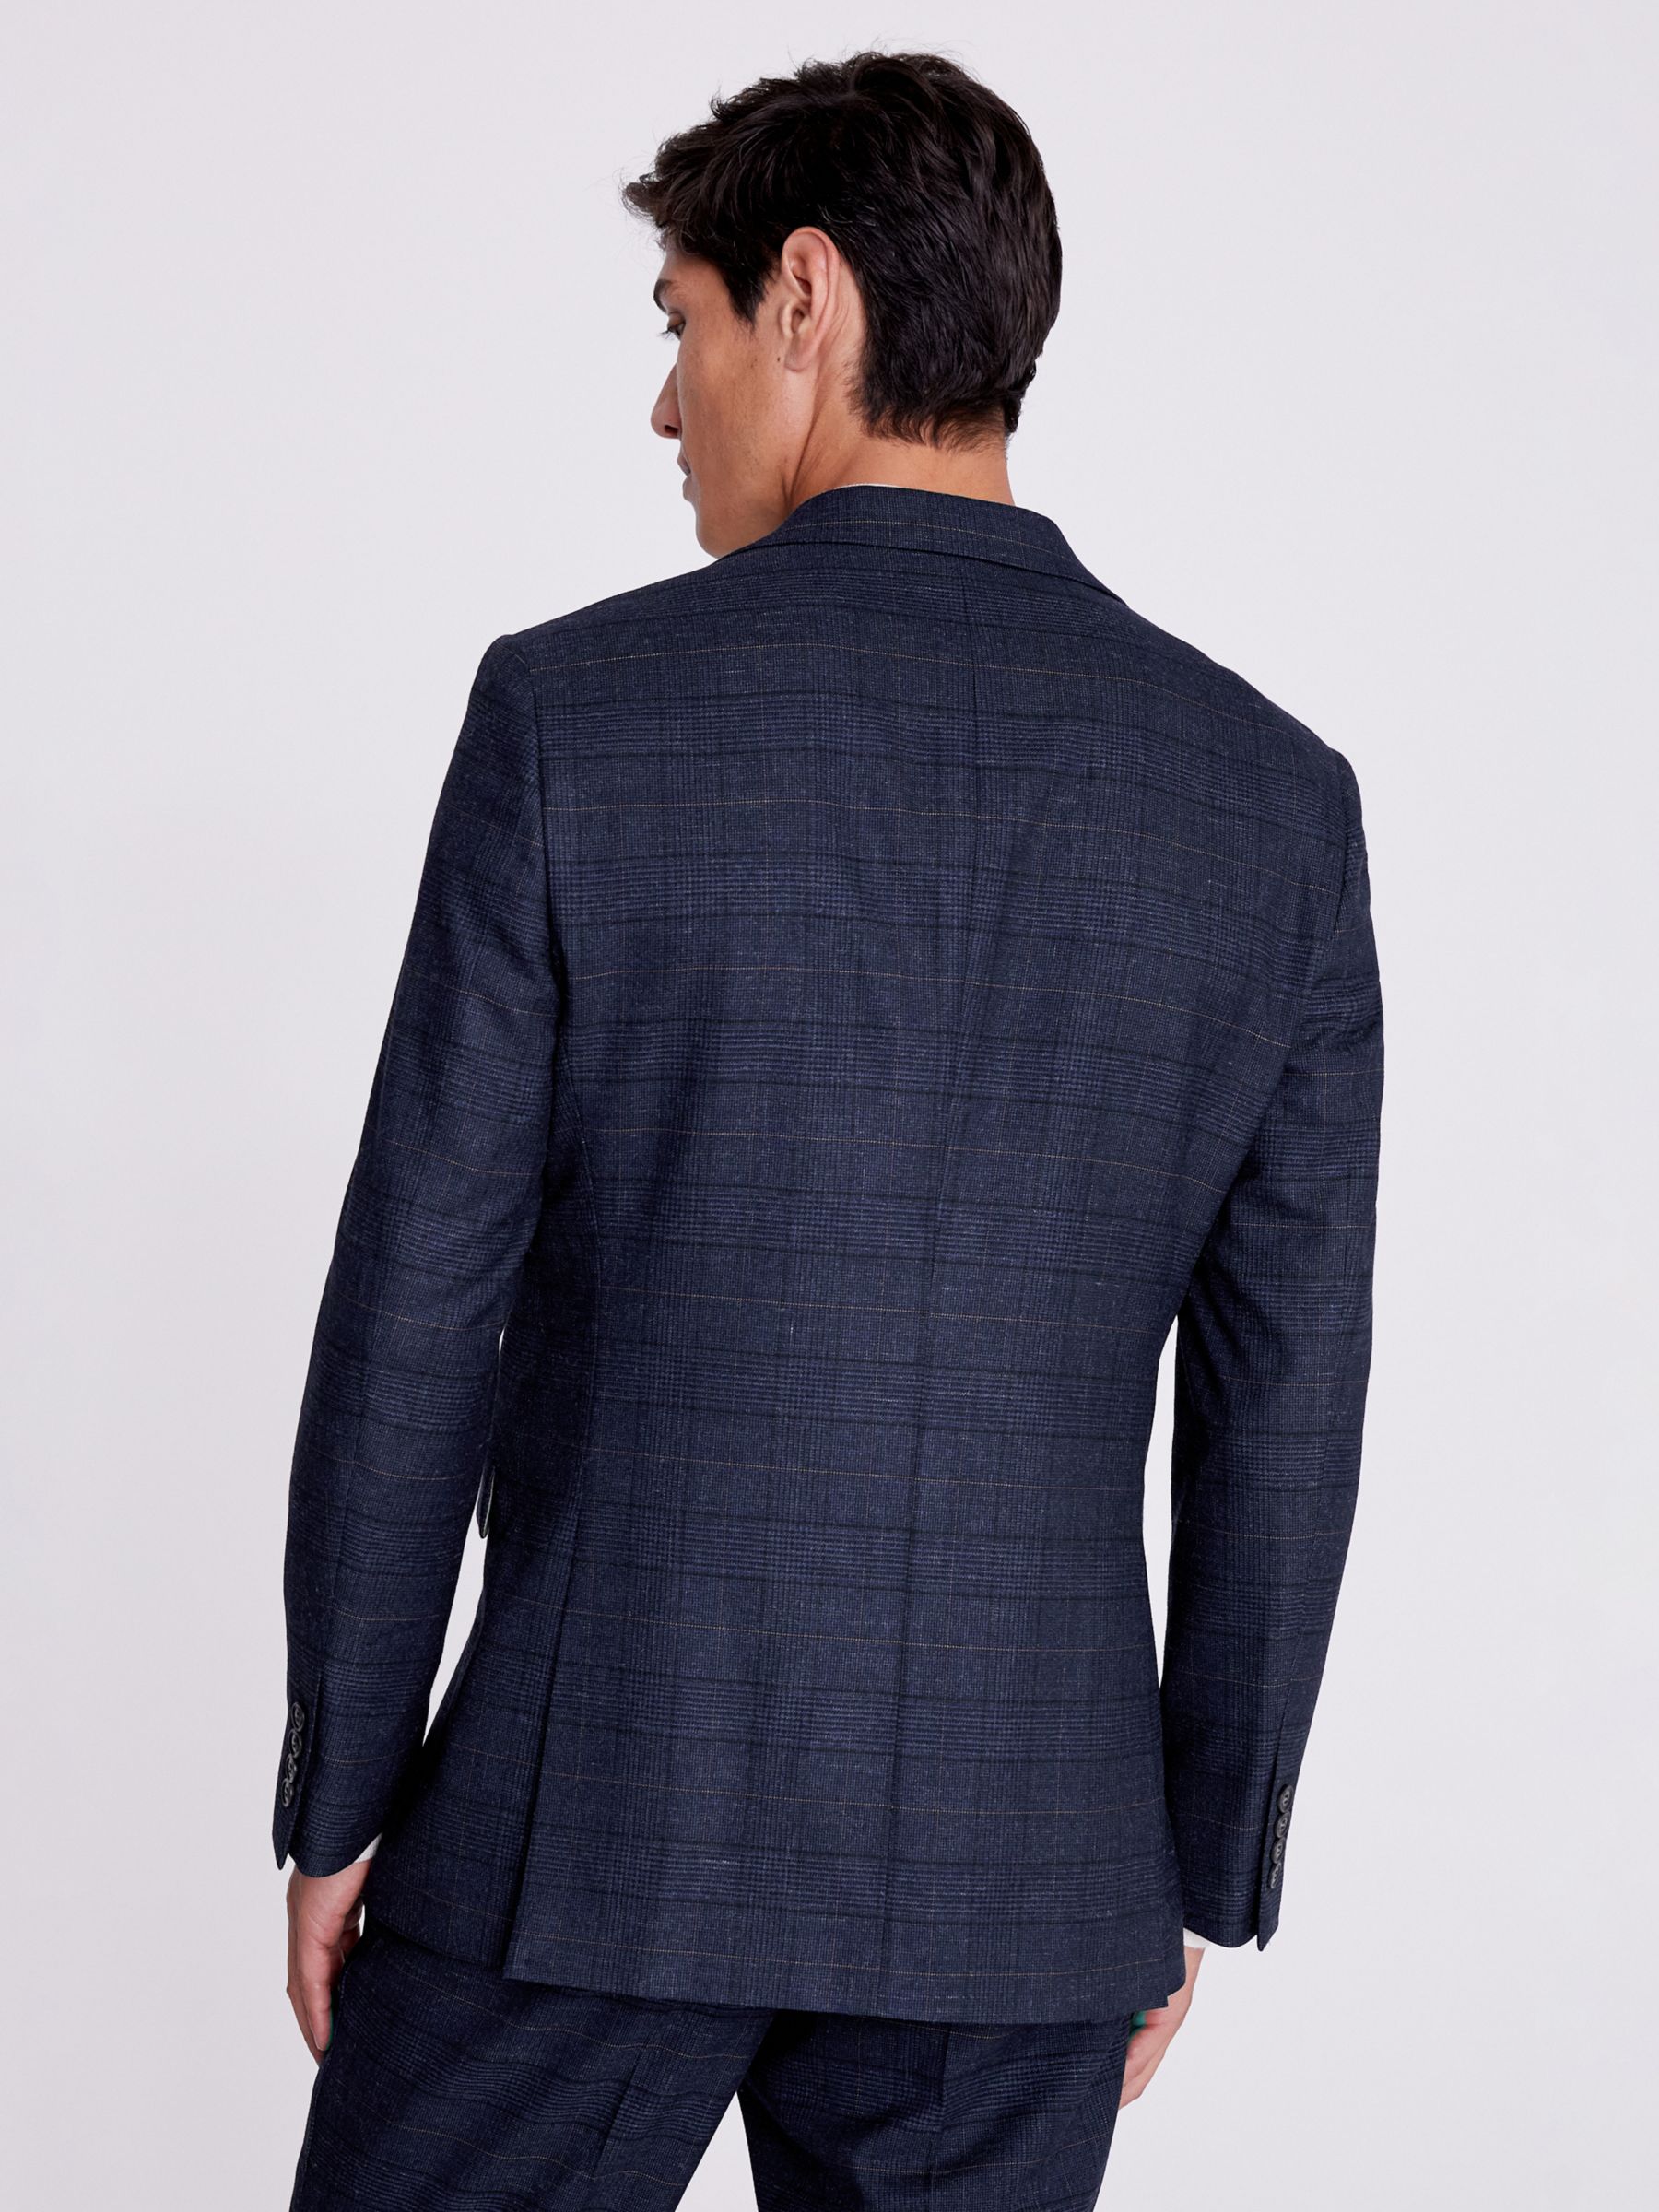 Moss Regular Fit Check Suit Jacket, Navy, 34S